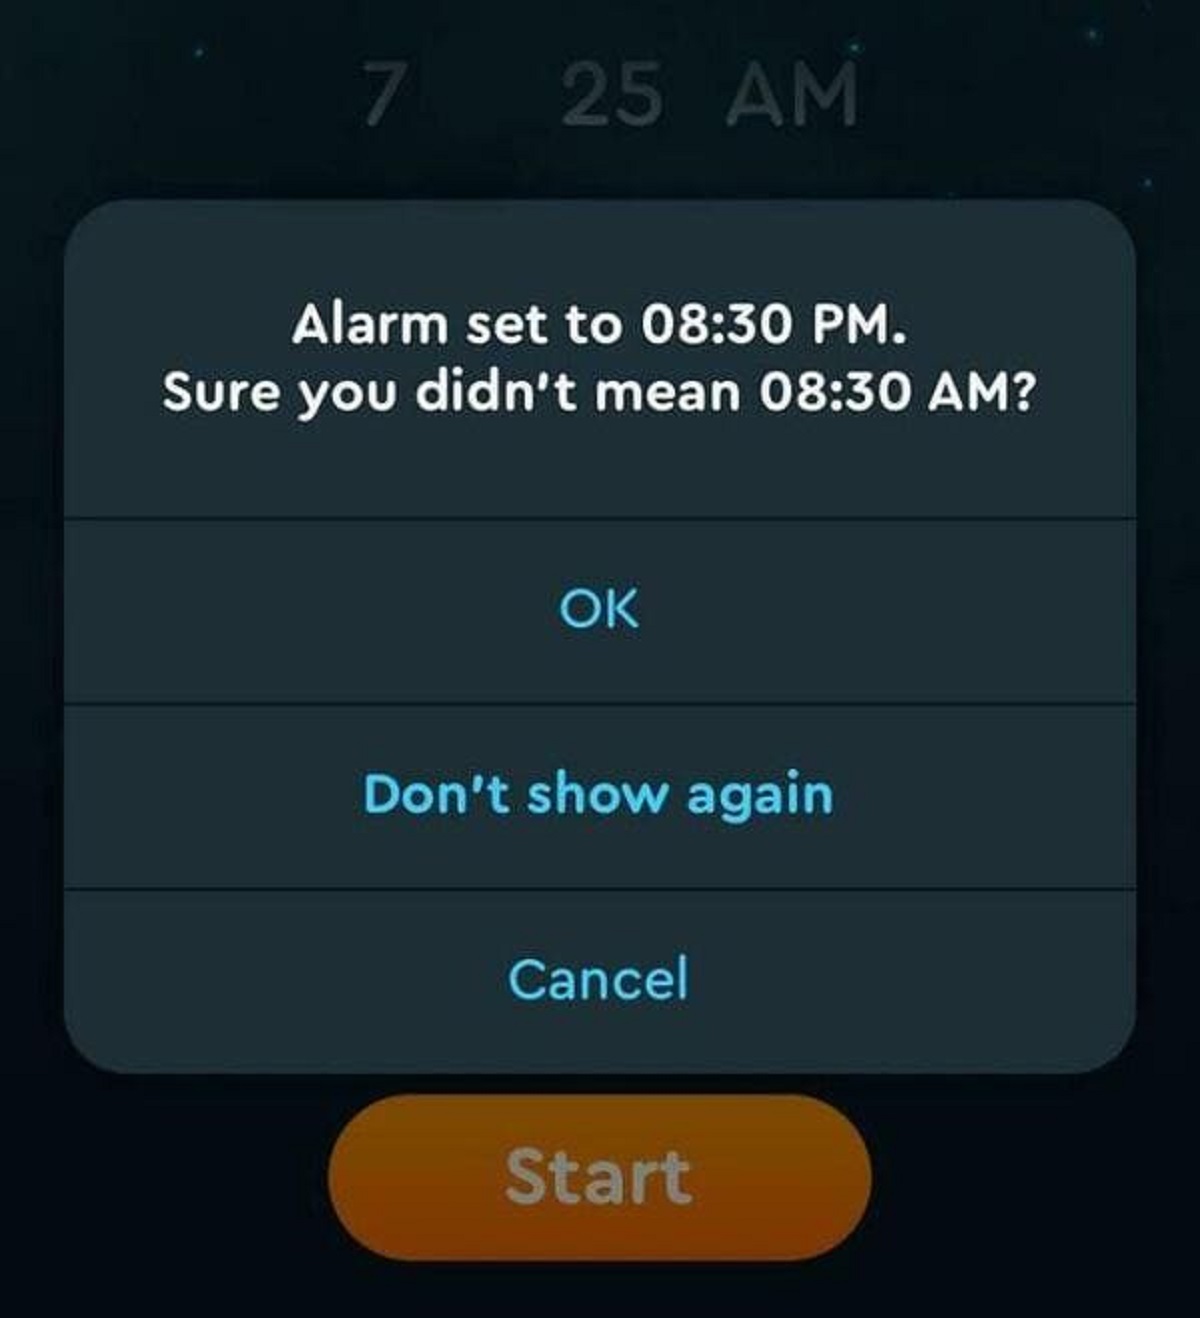 “This Alarm Which Saved Me A Frantic Call To My Boss Tomorrow”